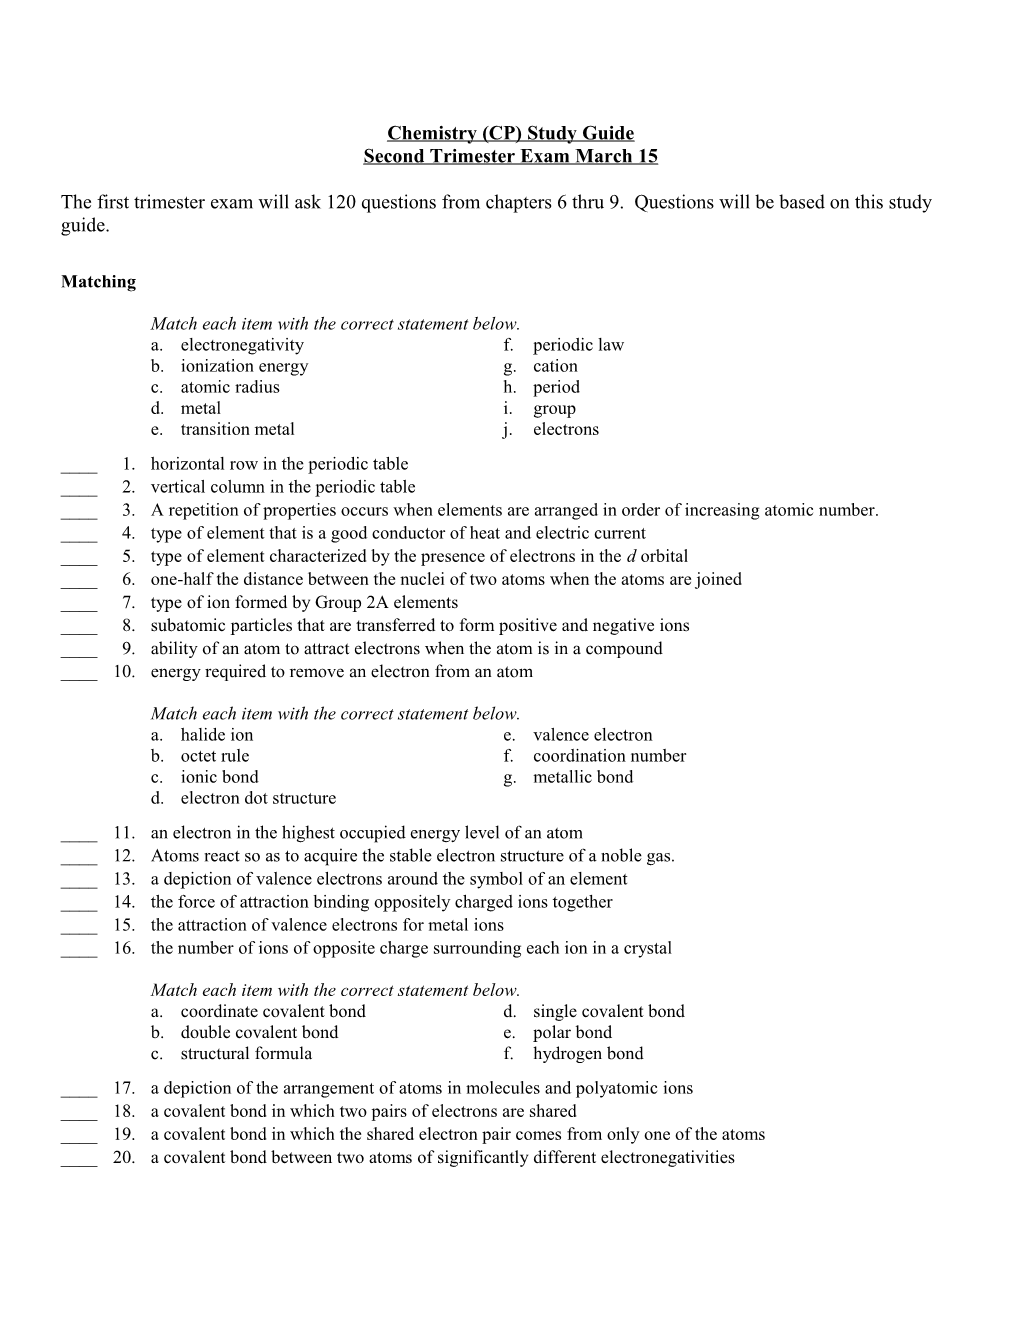 Chemistry Second Trimex Study Guide